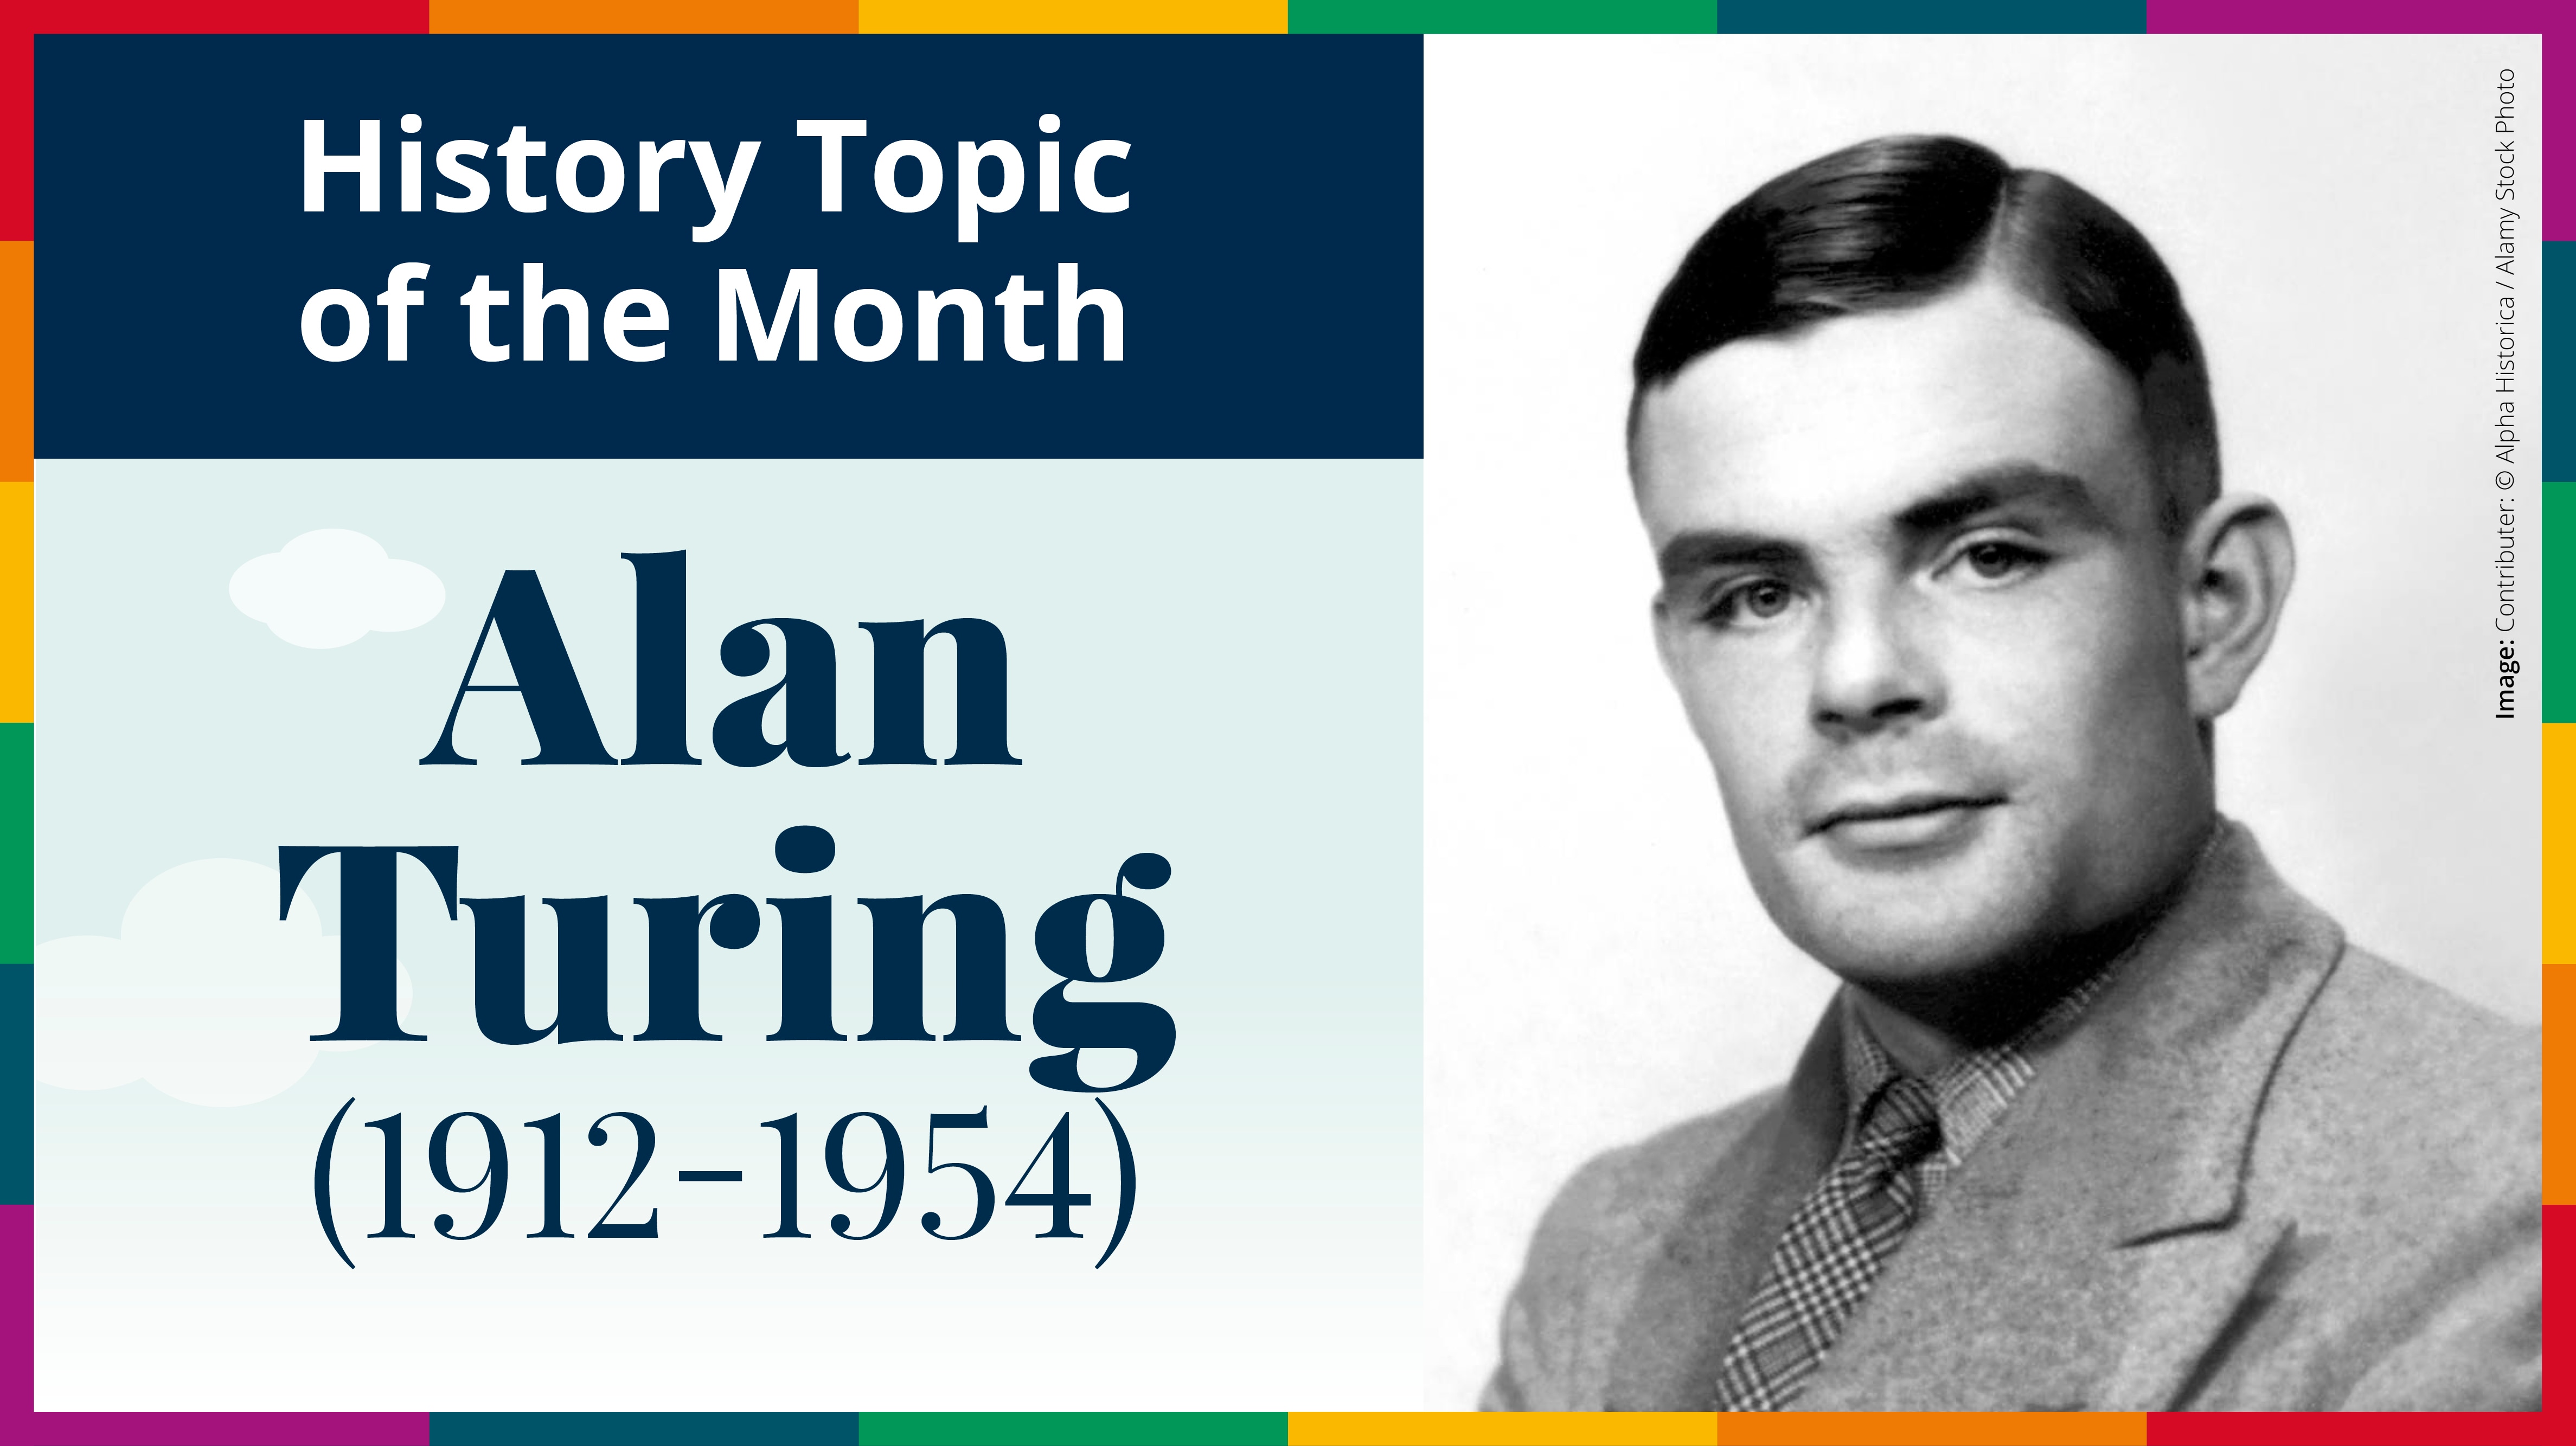 History topic of the month: Alan Turing